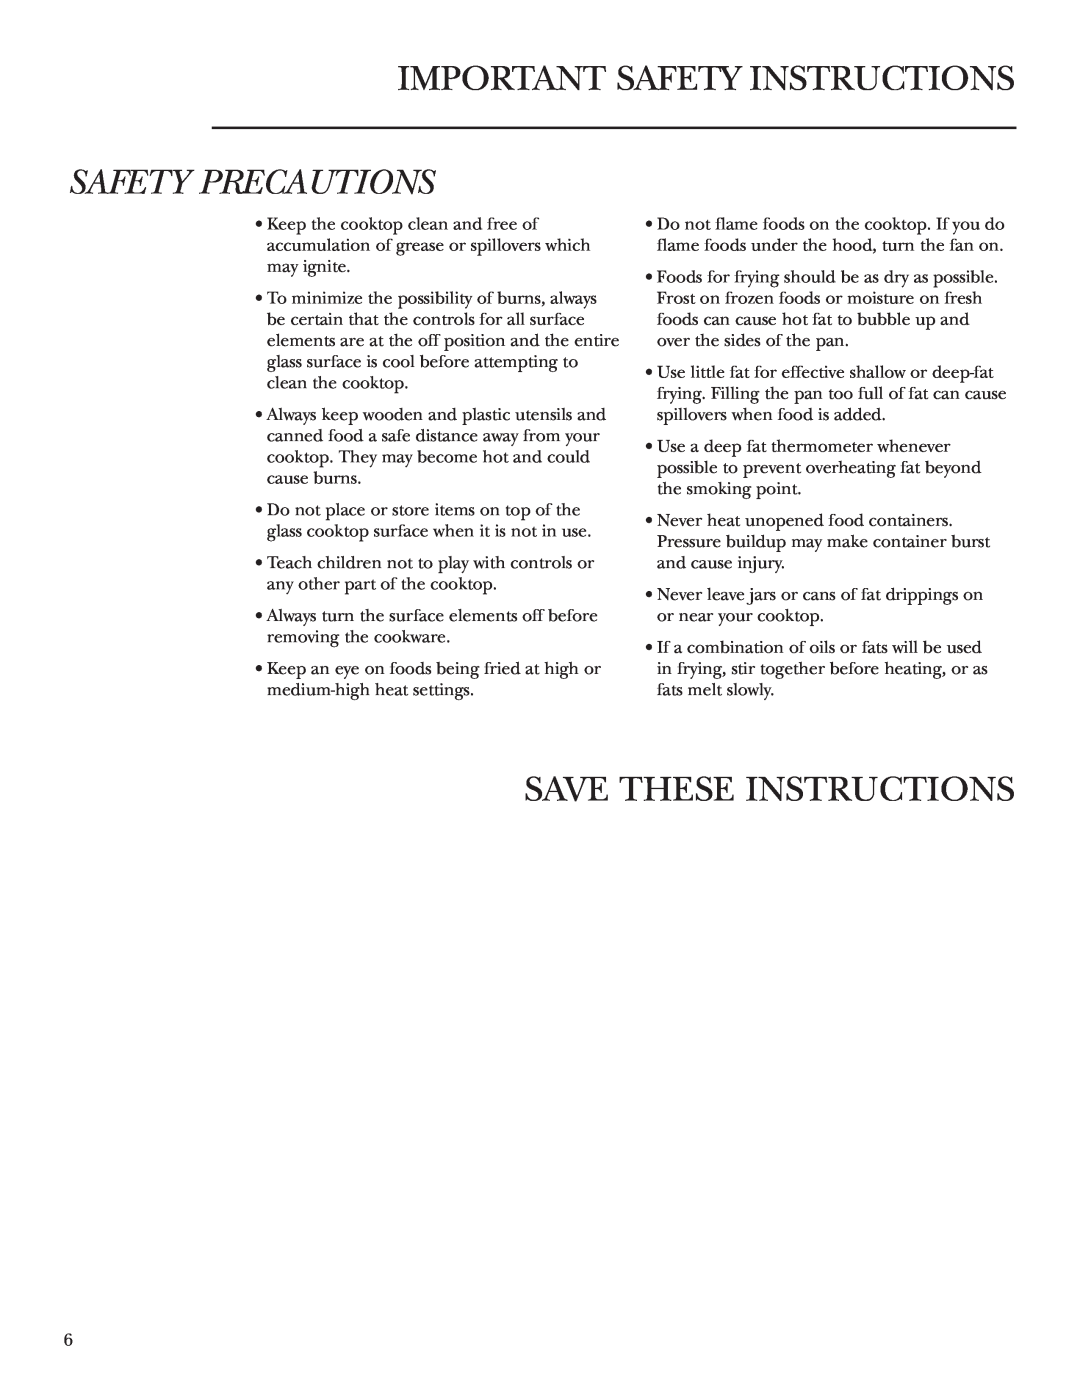 GE Monogram ZEU36K owner manual Save These Instructions, Important Safety Instructions, Safety Precautions 